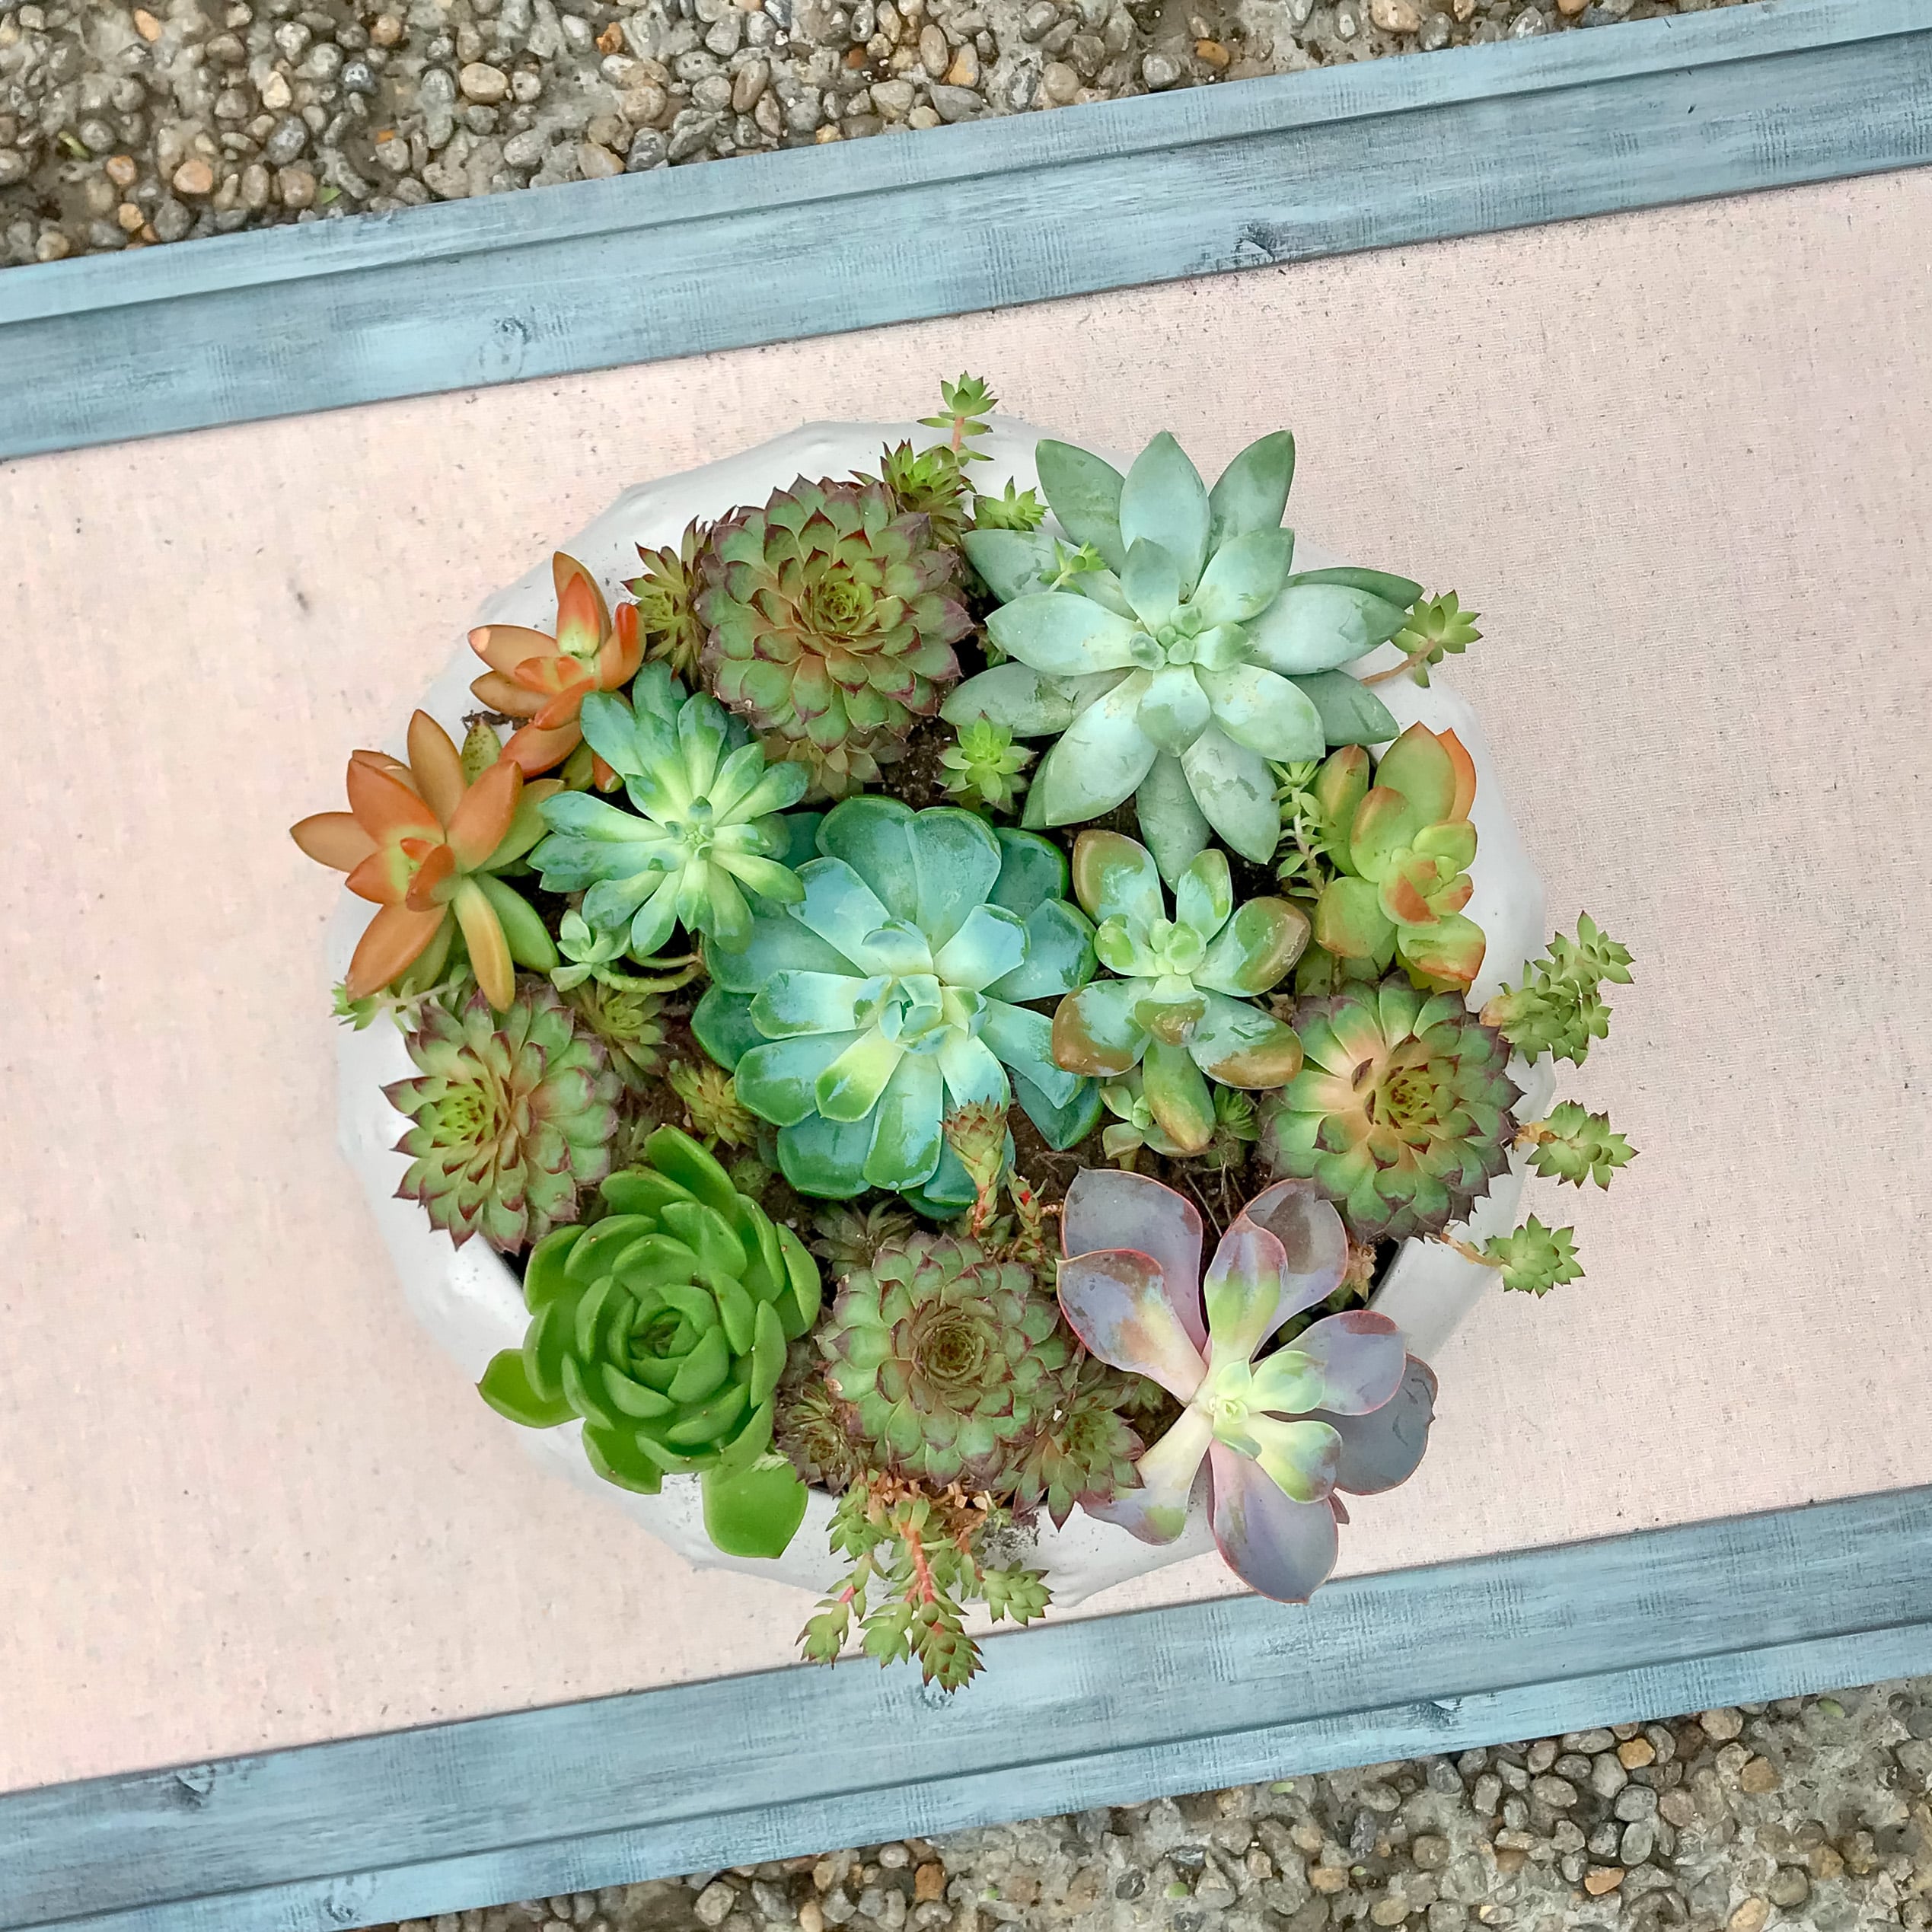 How to Plant a Succulent Bowl